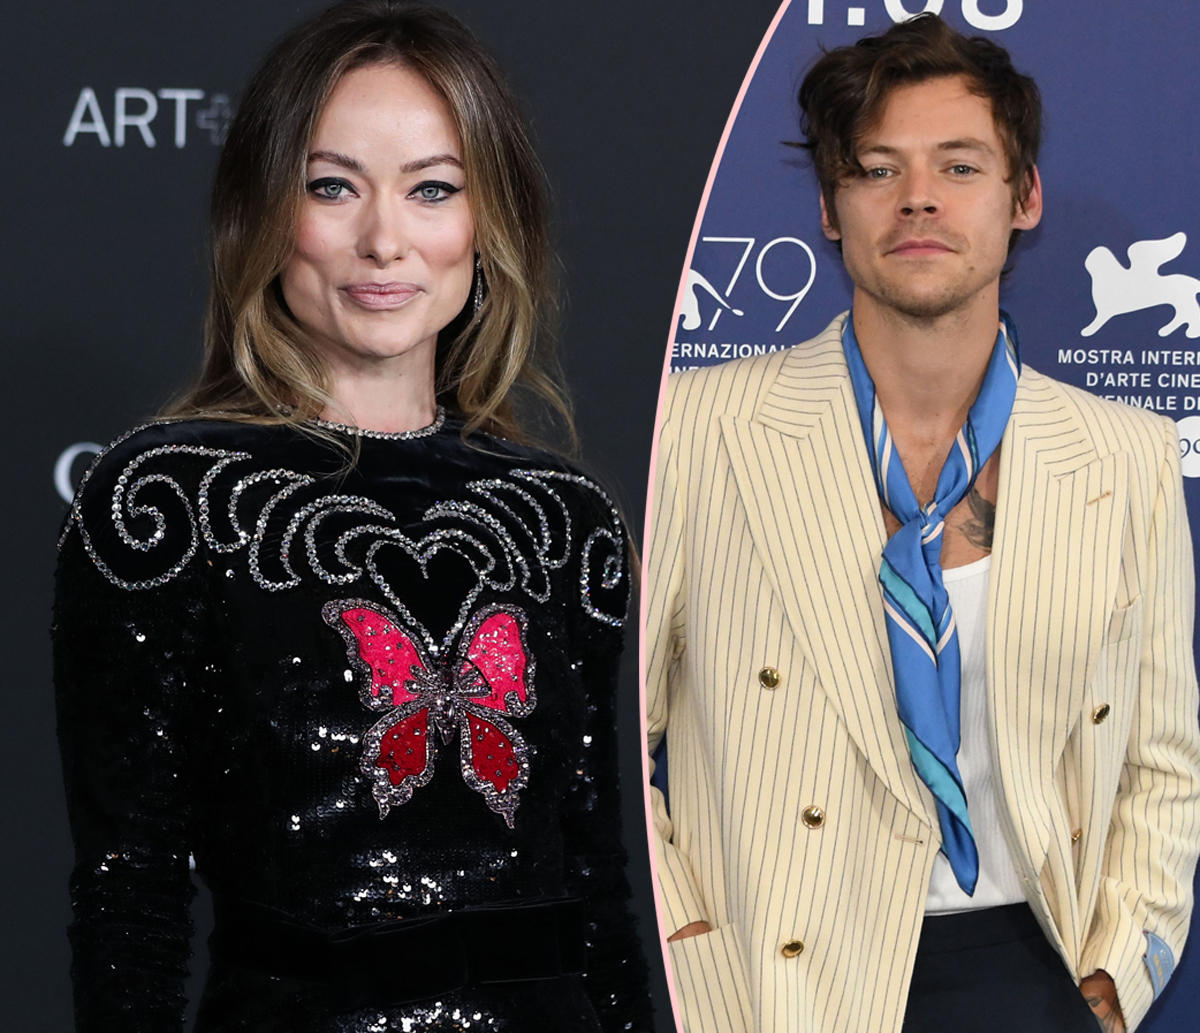 #Harry Styles & Olivia Wilde ‘Taking A Break’ After 2 Years Together